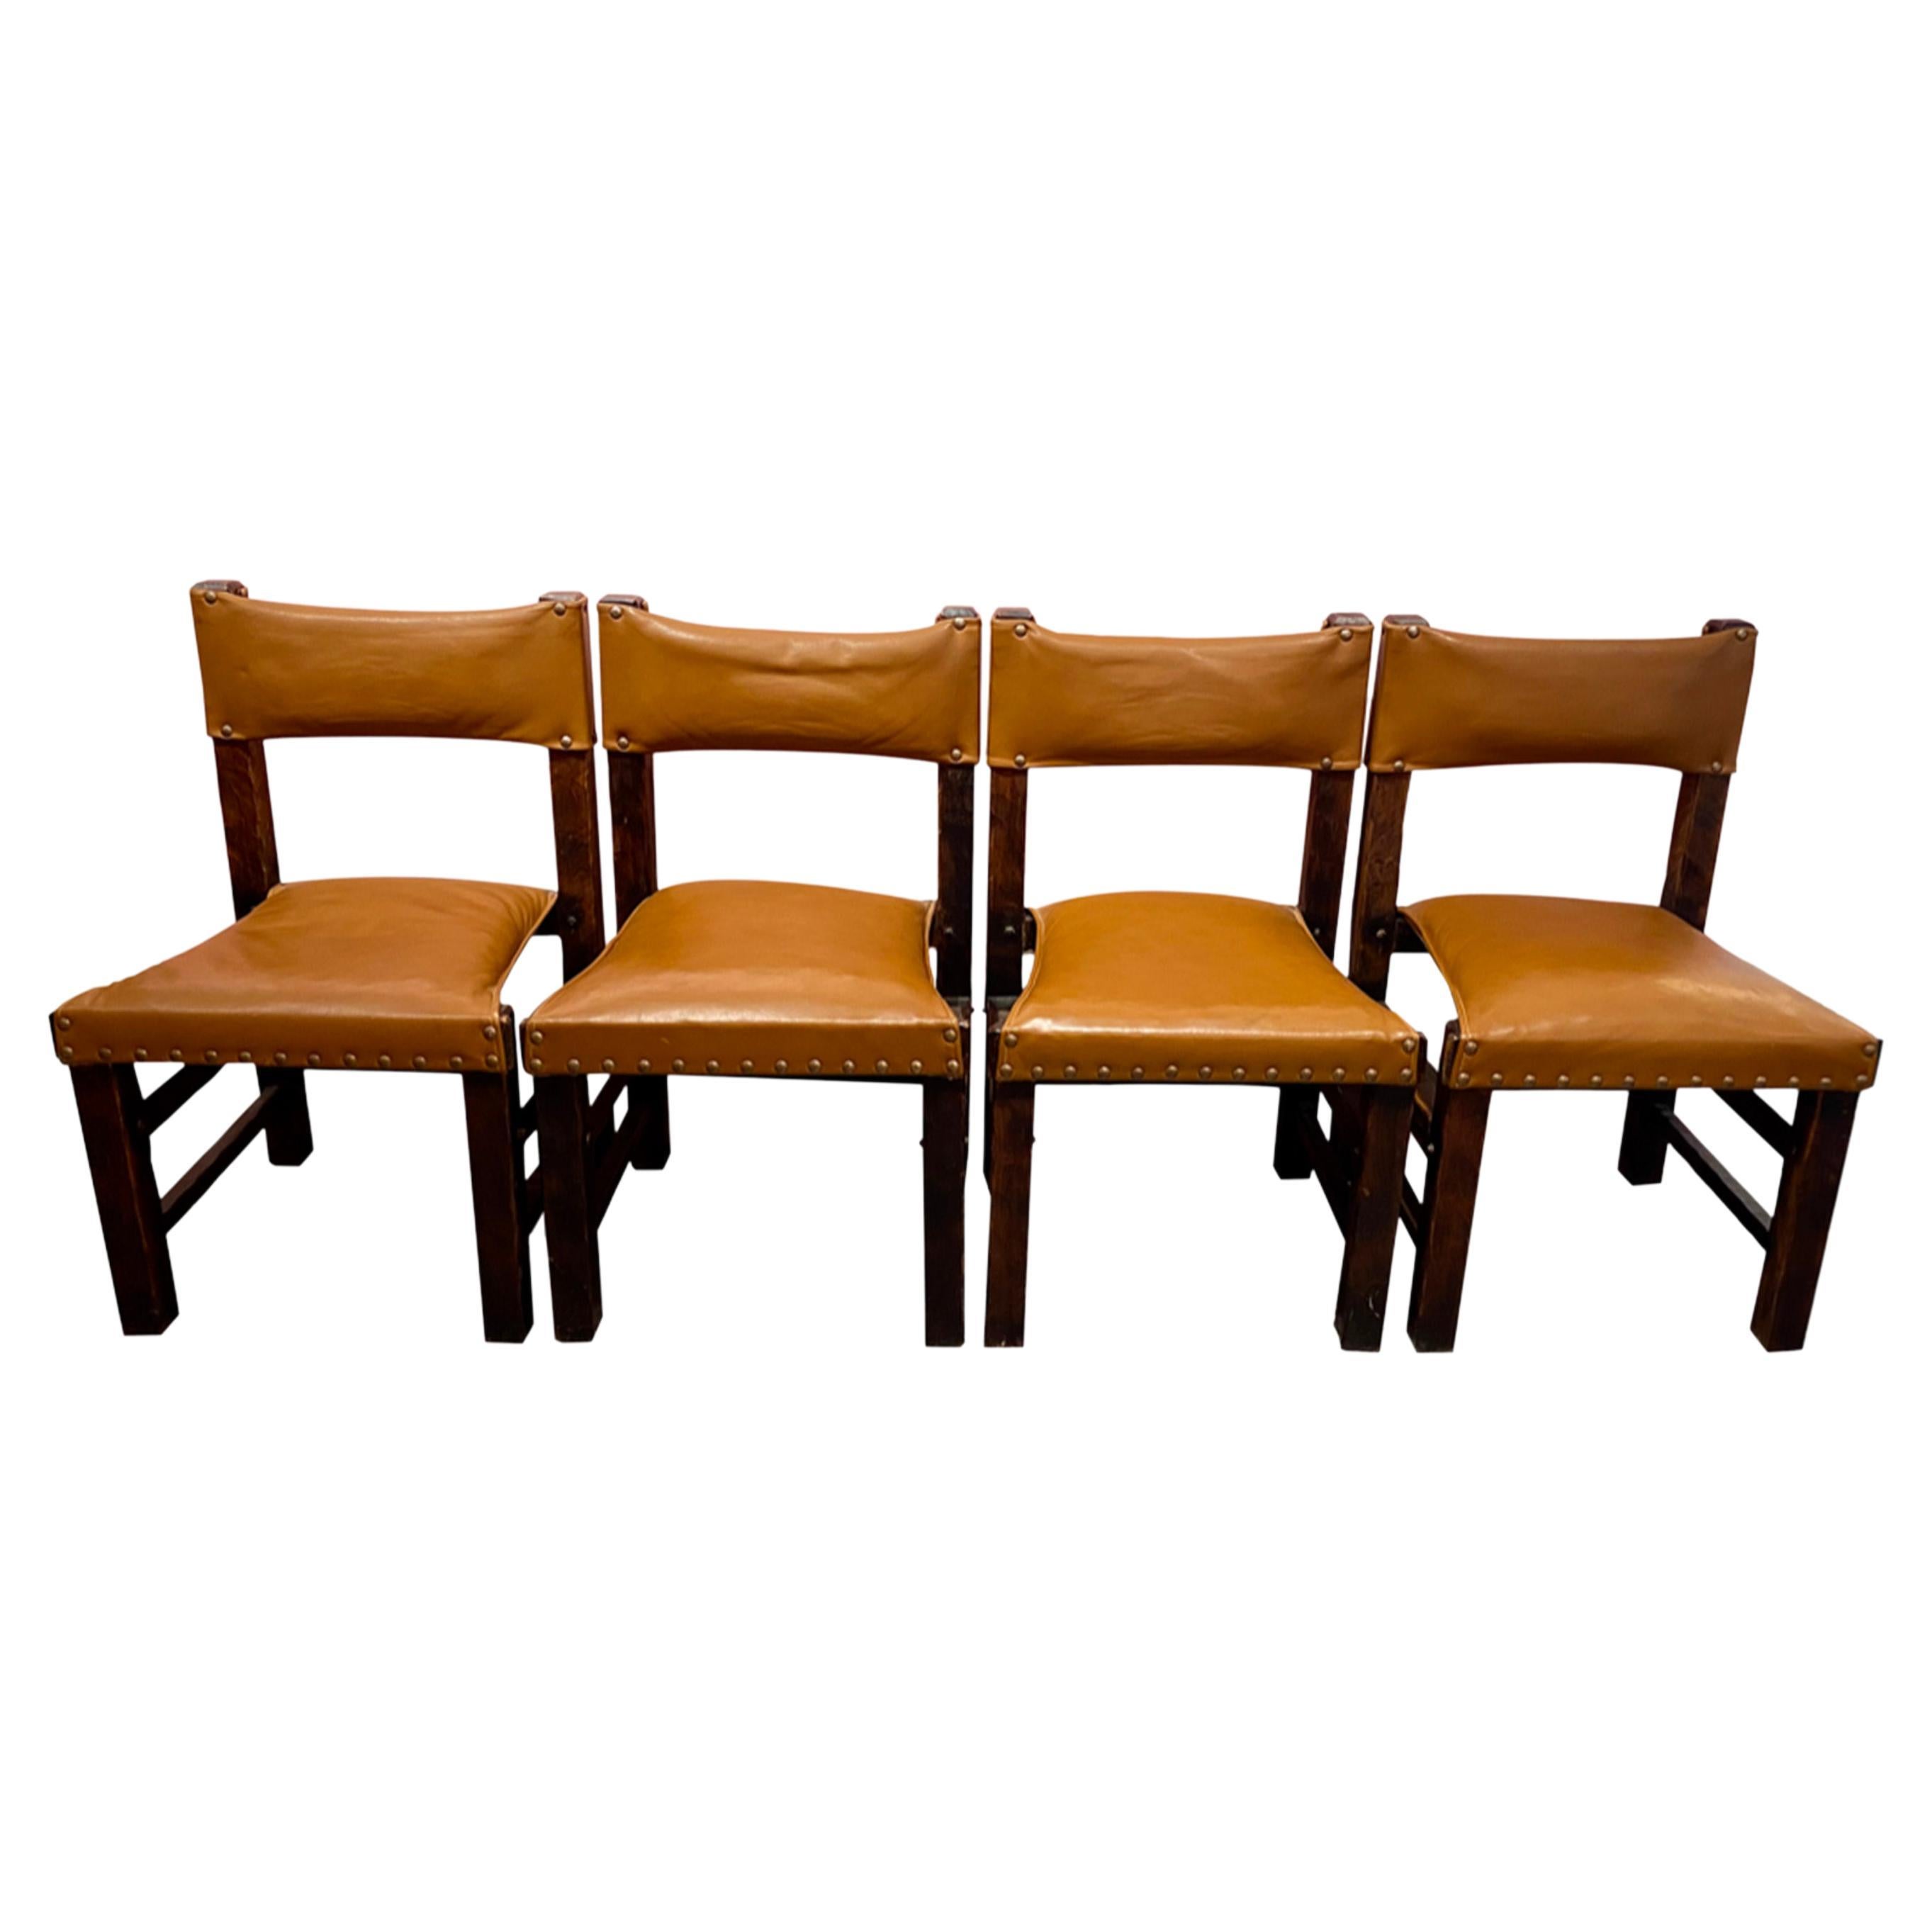 Set of 4 Brazilian chairs from the 60's in leather and wood. For Sale